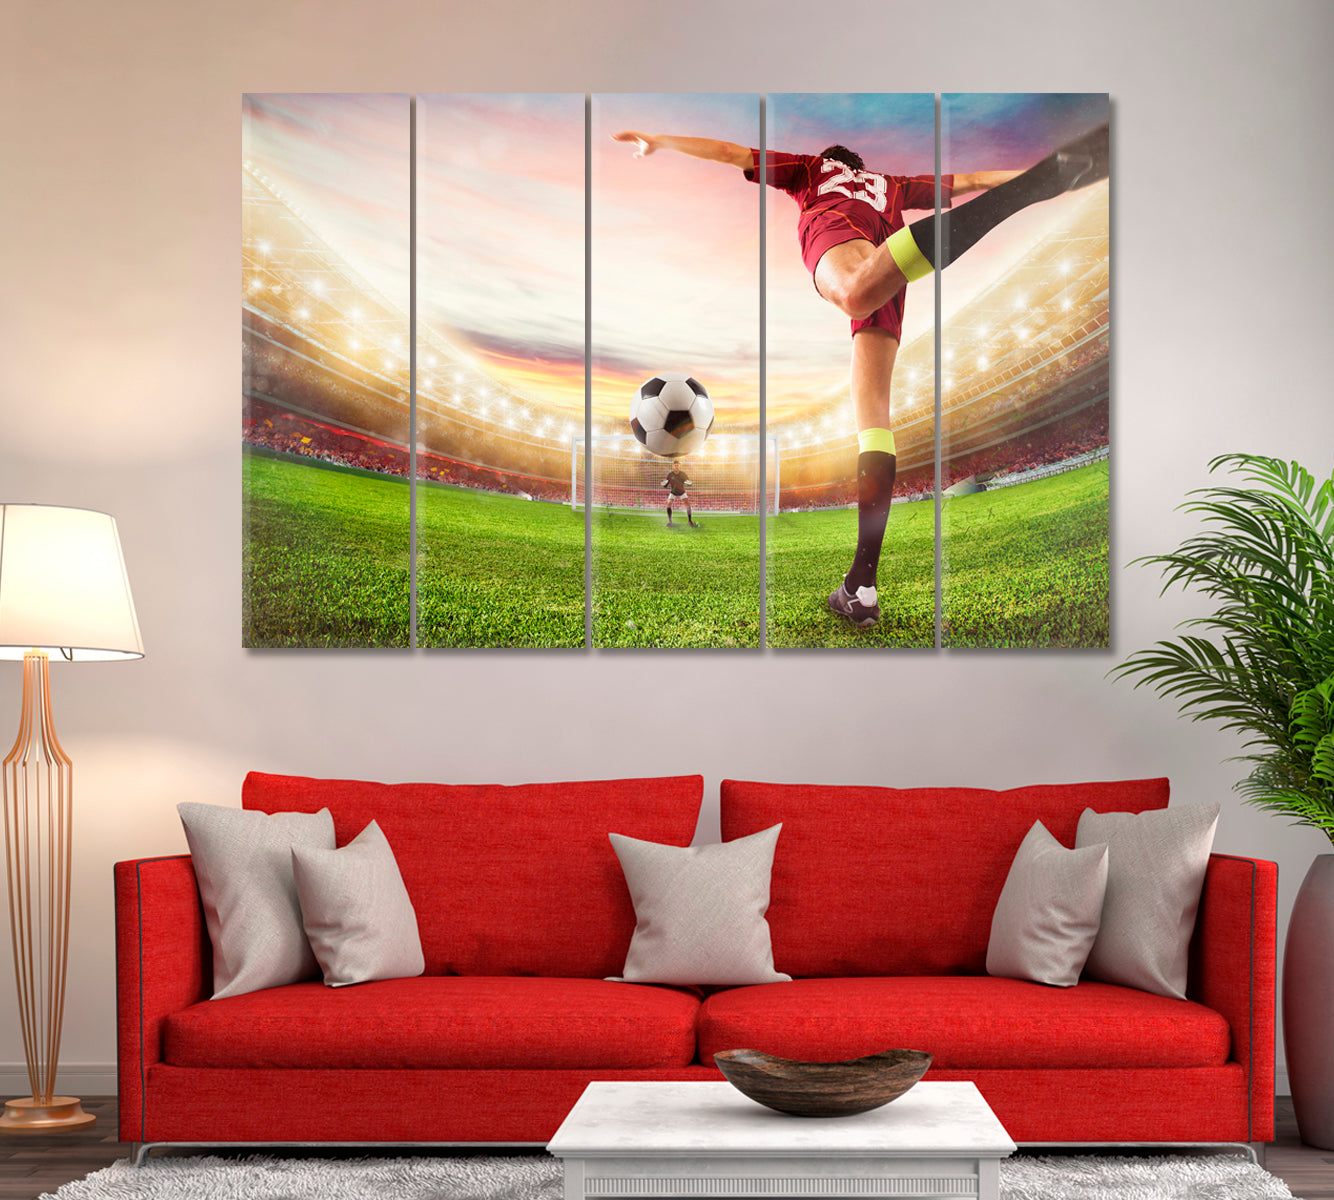 Soccer Striker in Action Canvas Print ArtLexy 5 Panels 36"x24" inches 